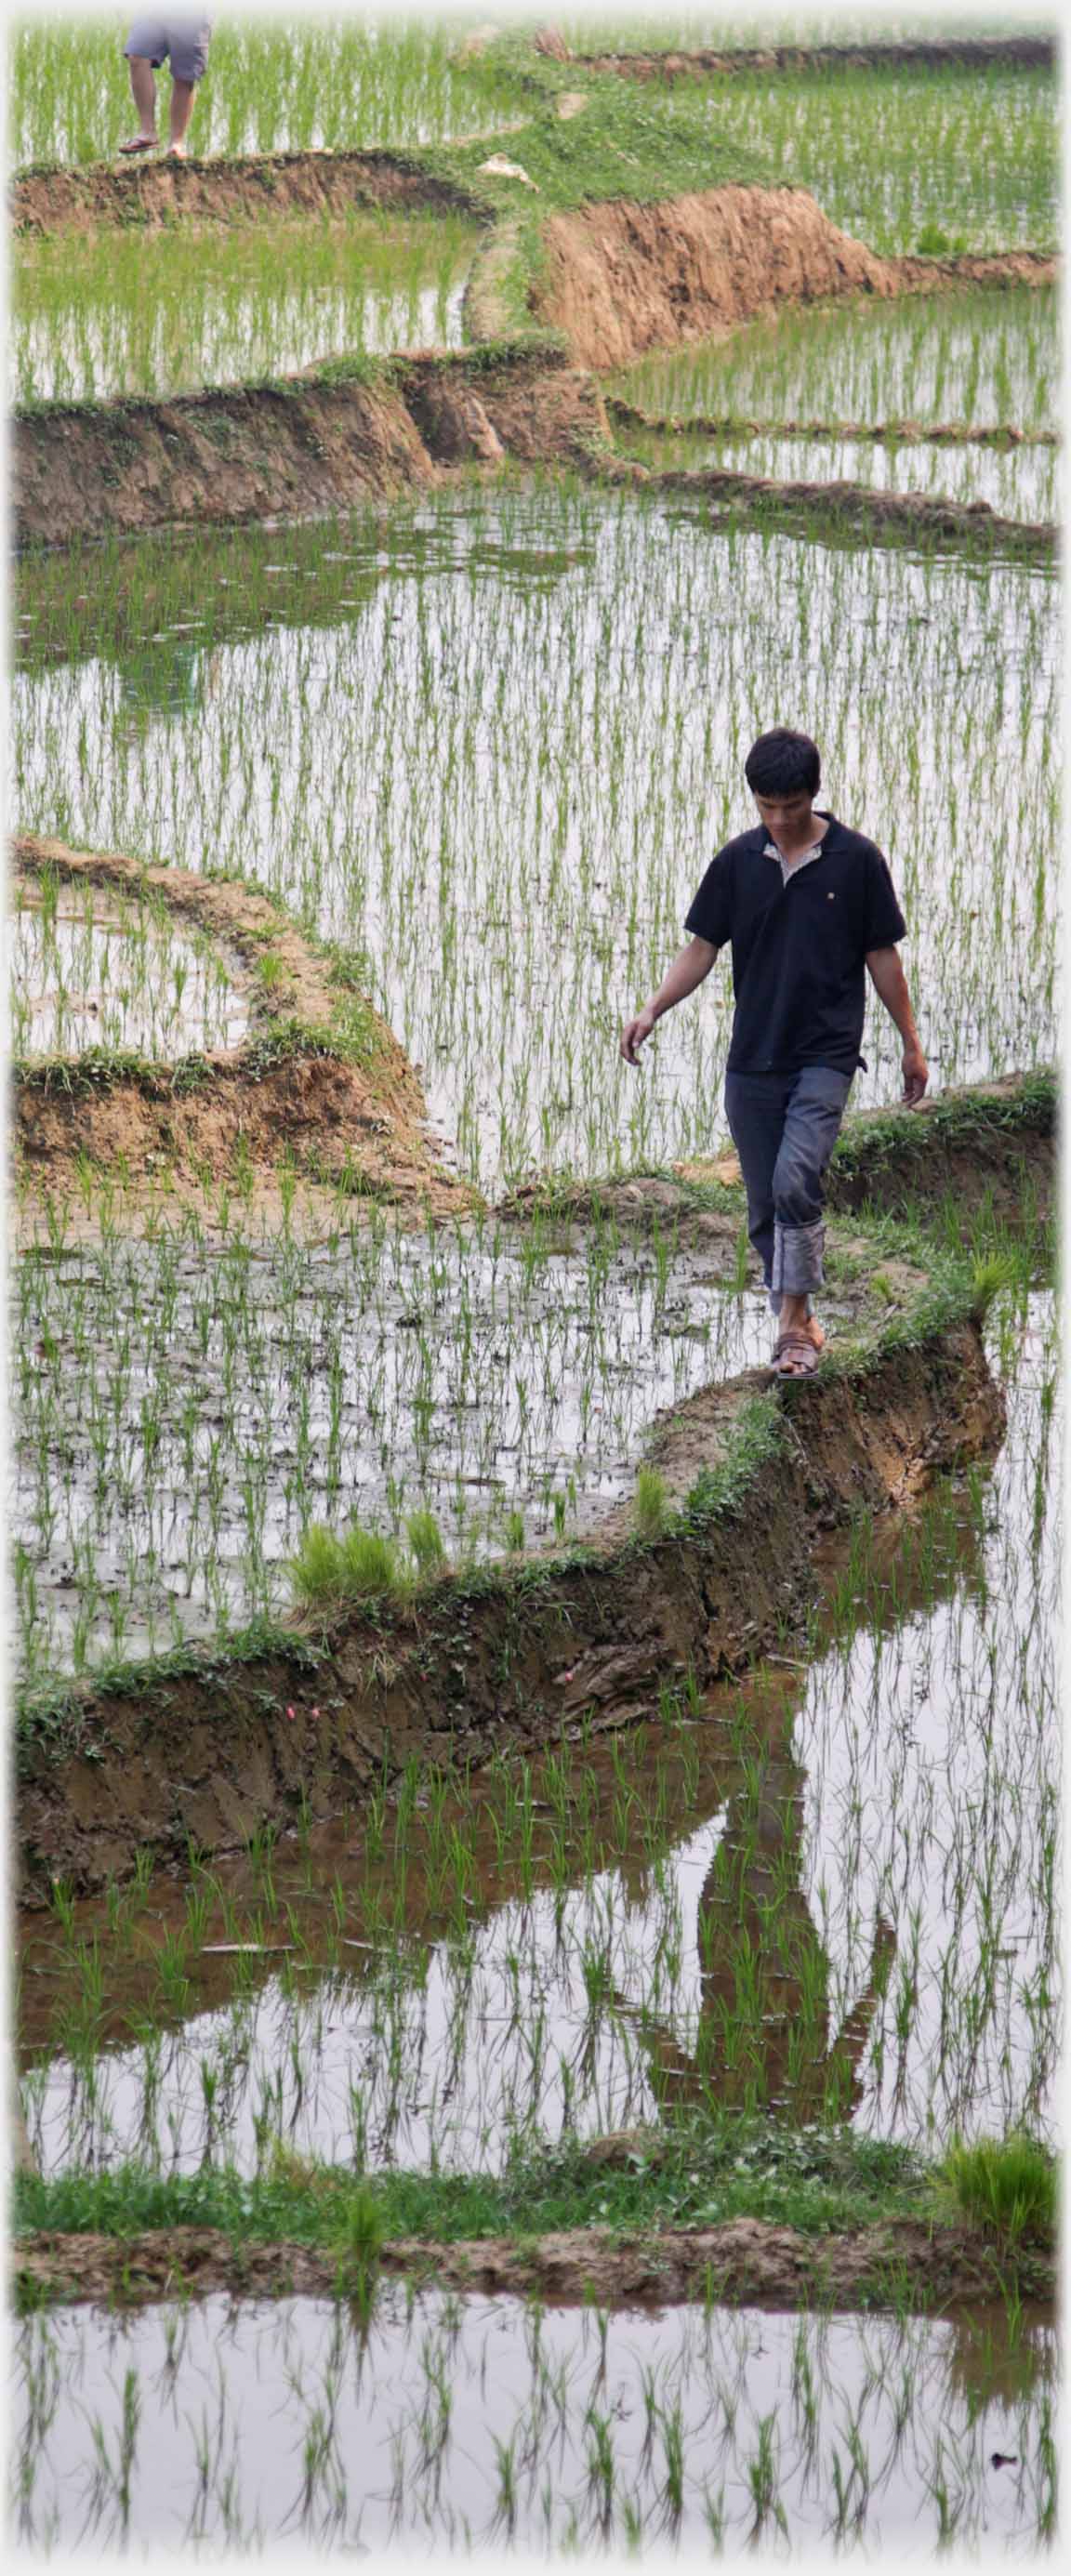 Vietnamese man walking on dyke, showing how narrow the path is.